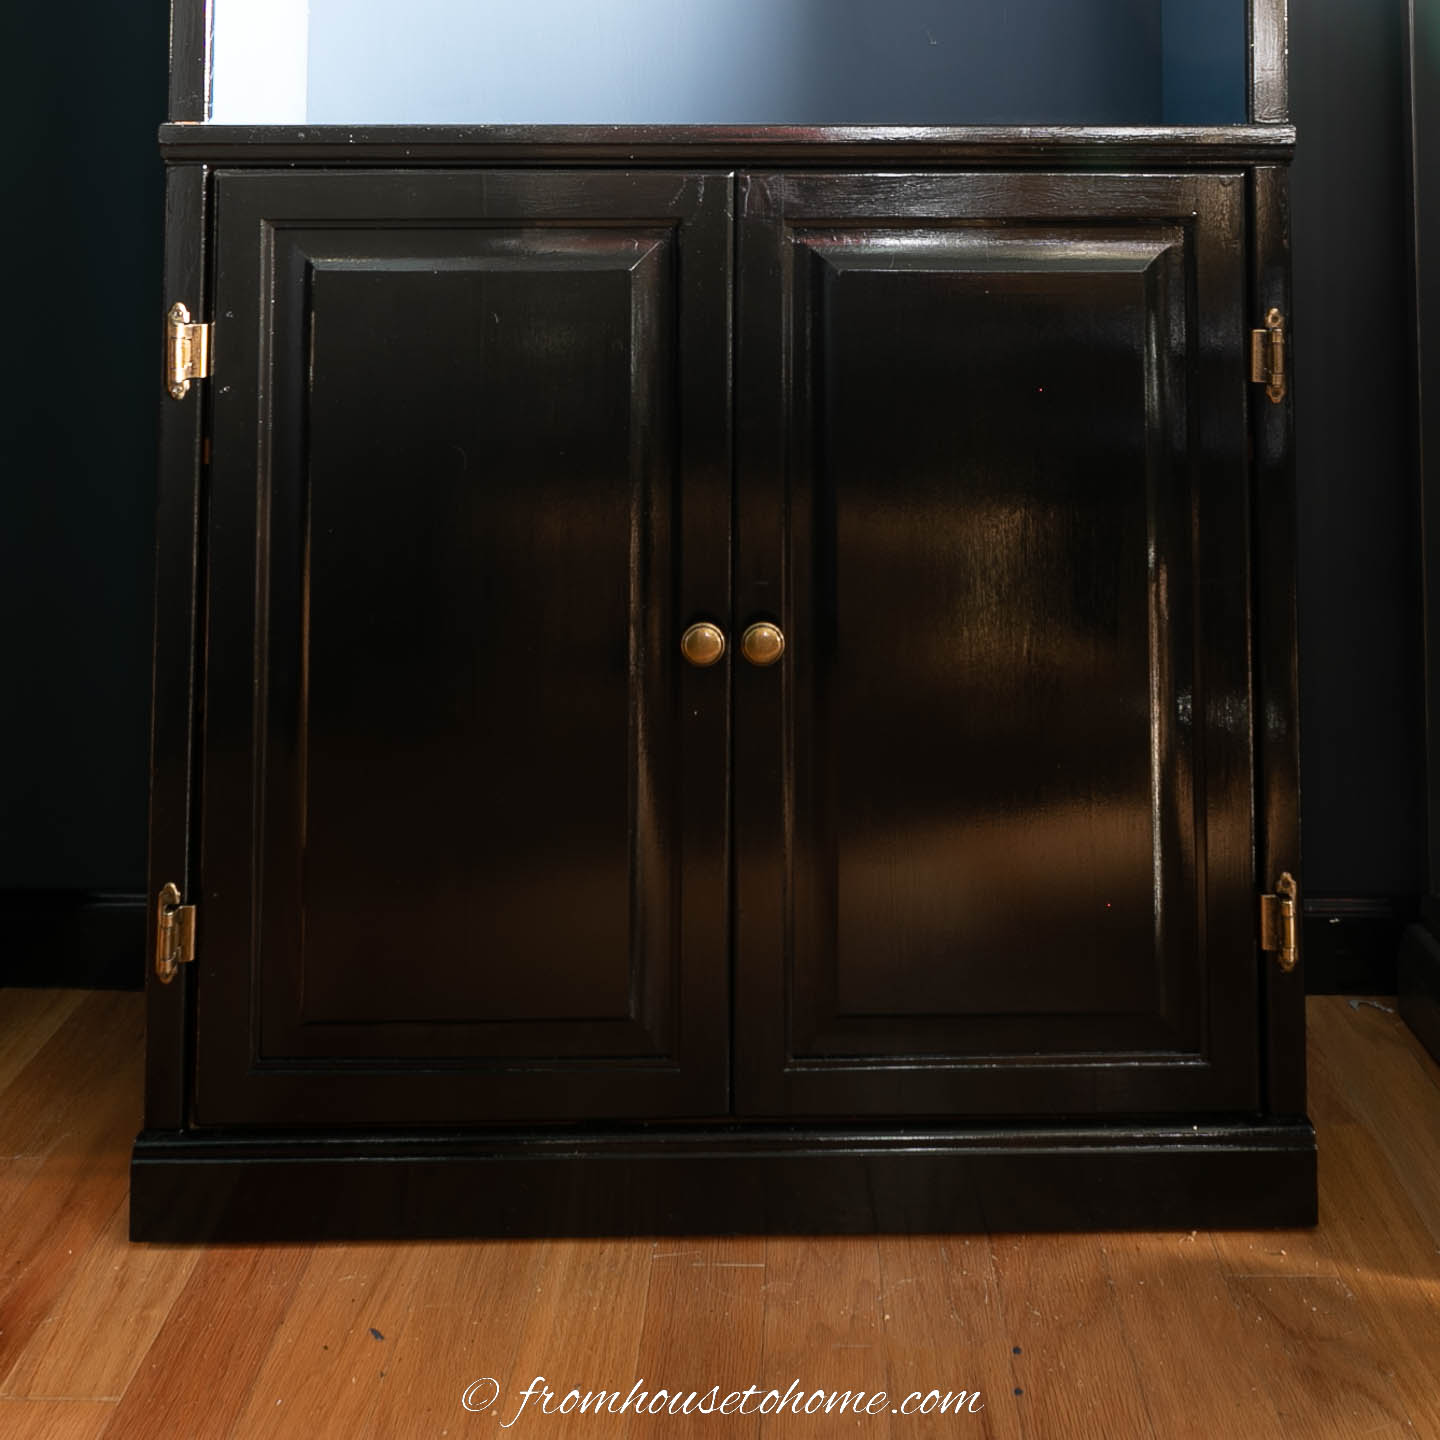 Cabinet doors at the bottom of the bookshelf painted in gloss black paint with brass hardware